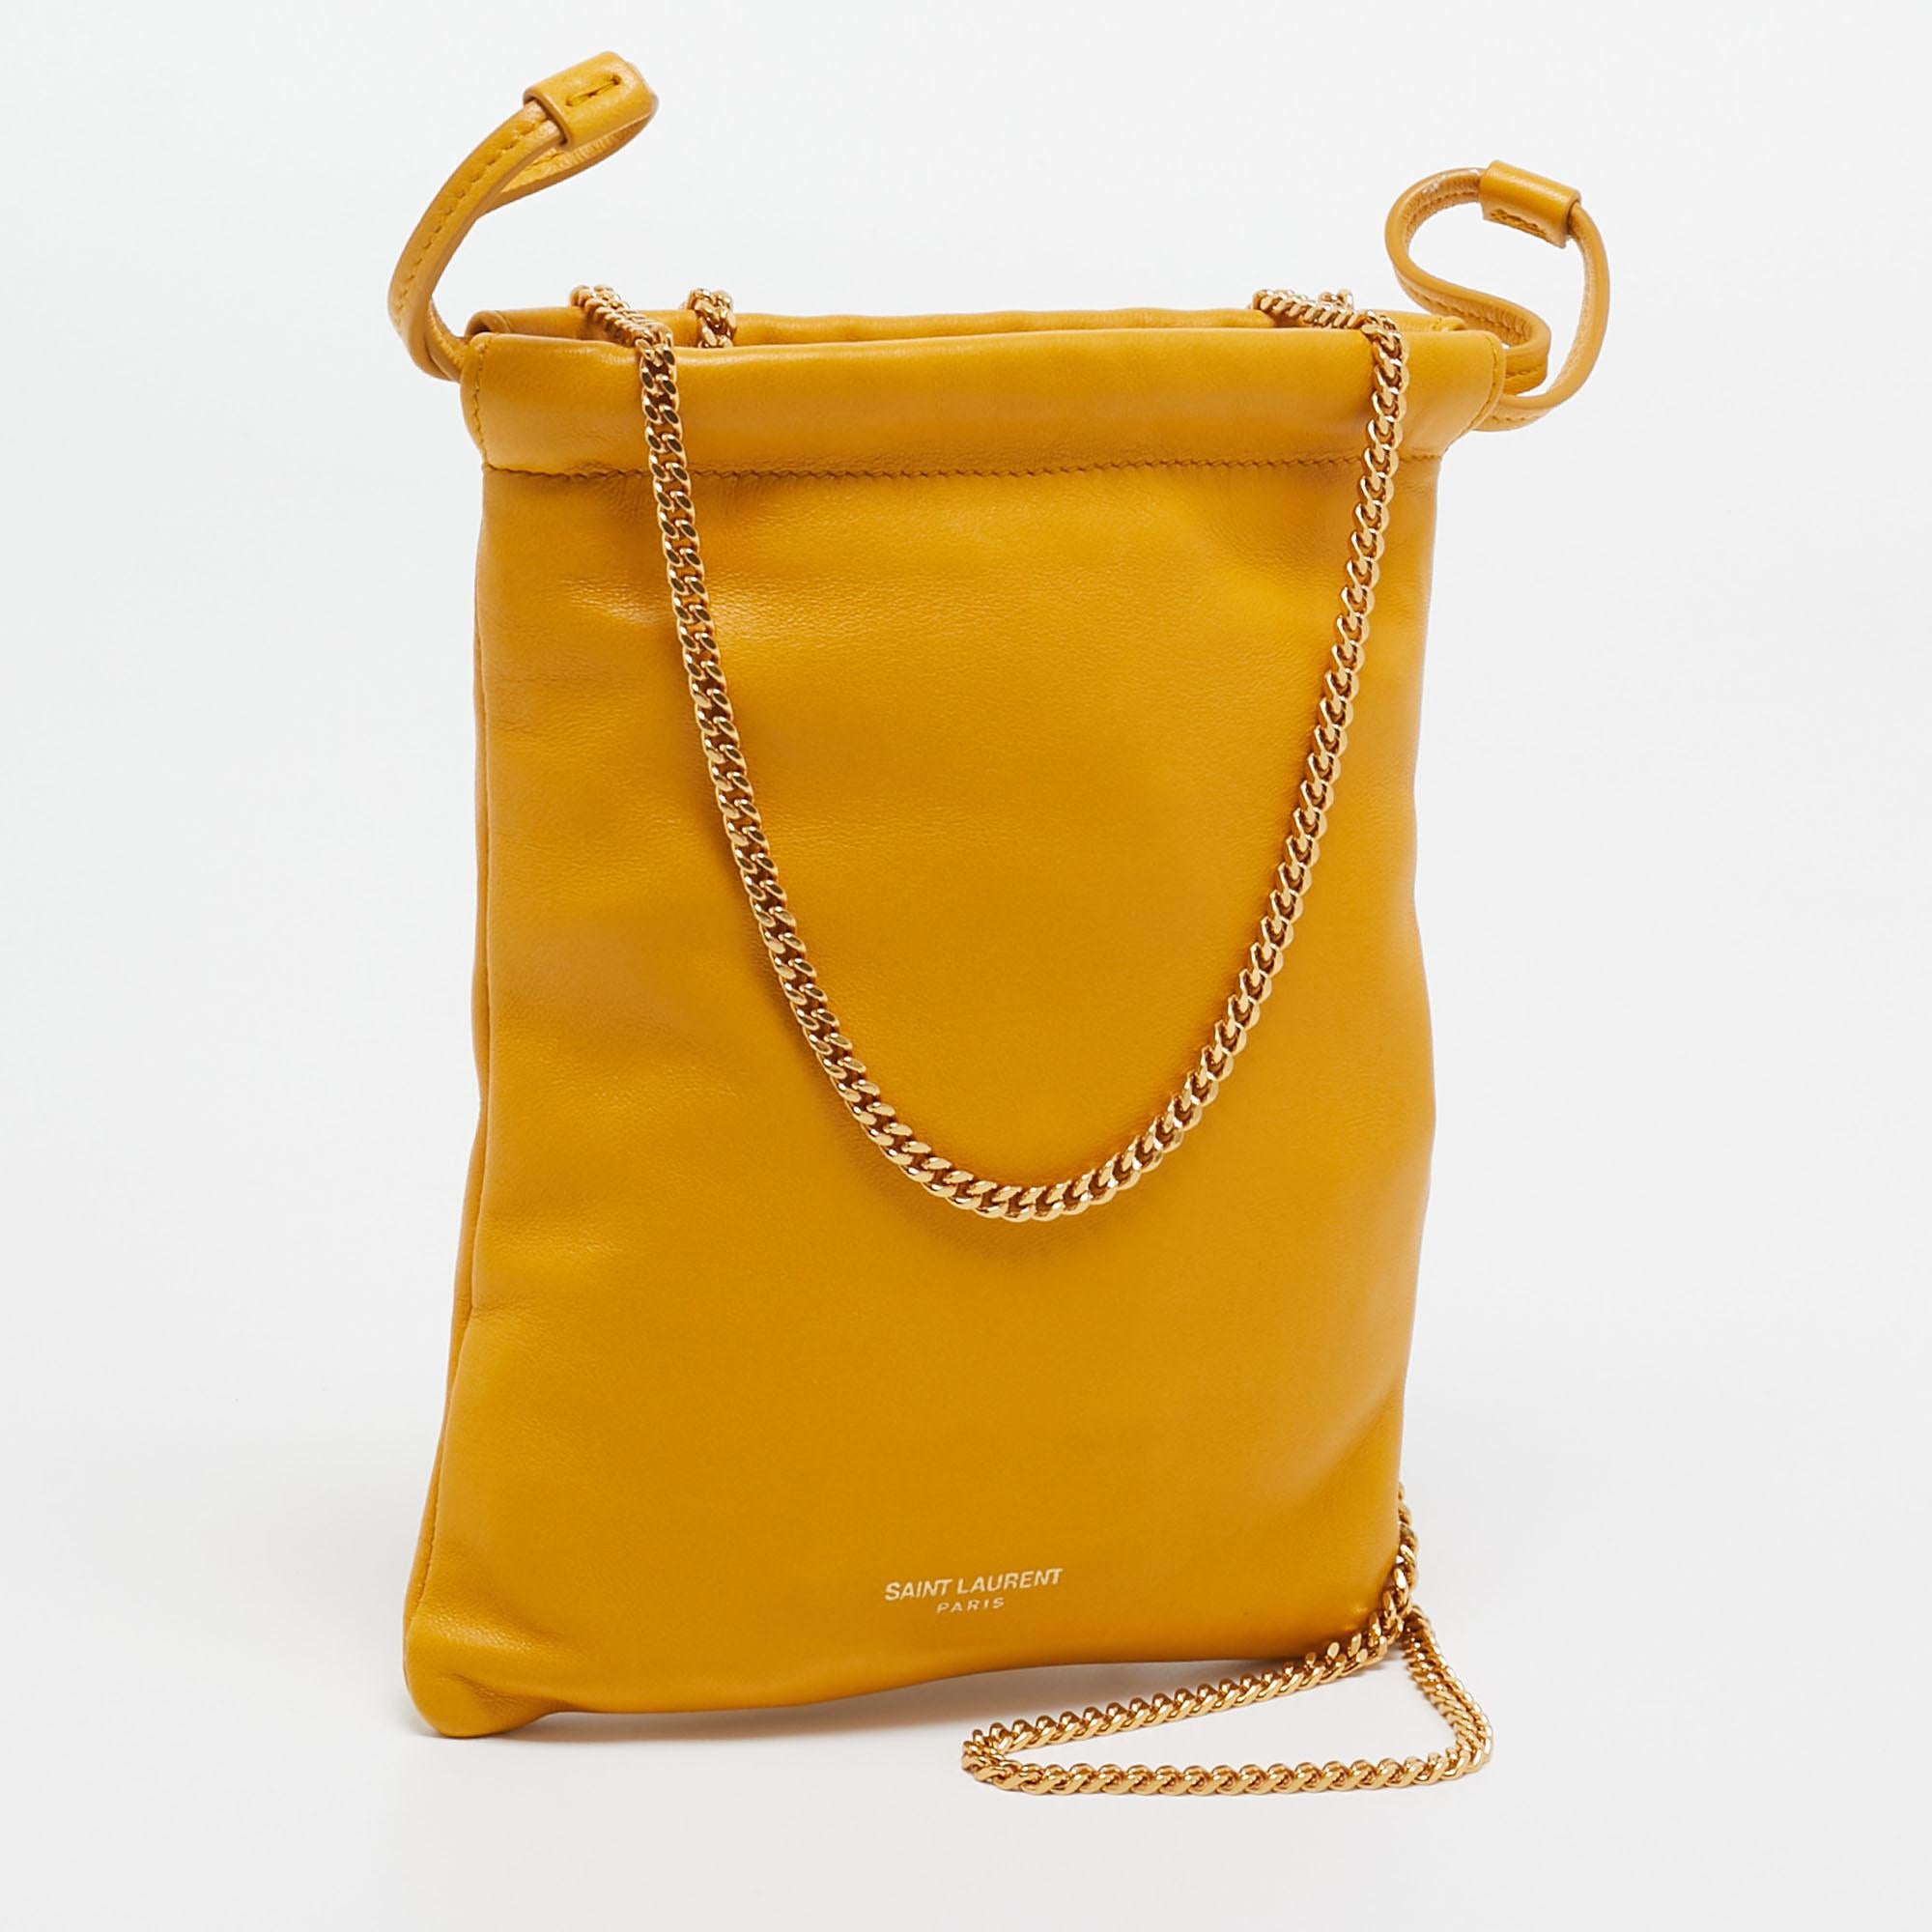 The Saint Laurent phone holder crossbody bag is a chic accessory crafted from luxurious yellow leather. Compact and functional, it features a sleek design, a secure phone compartment, and a crossbody strap for convenient hands-free wear, embodying